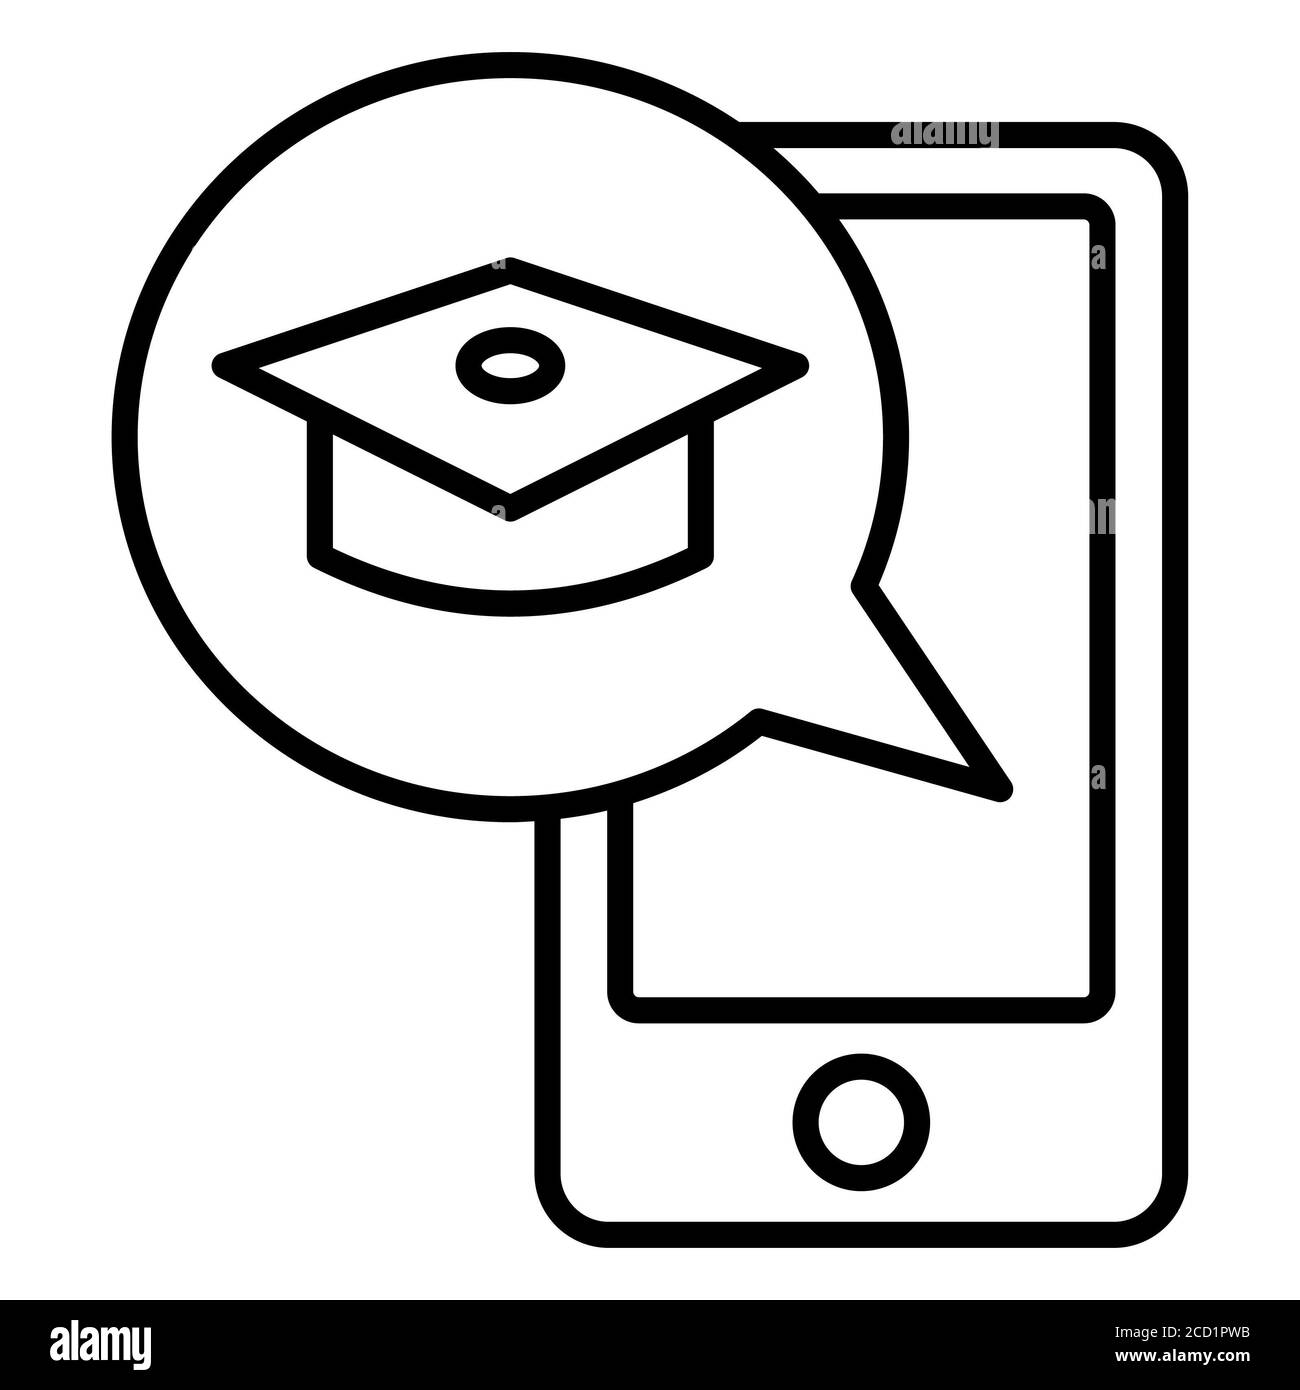 Education App Online Education Line Icons Stock Photo